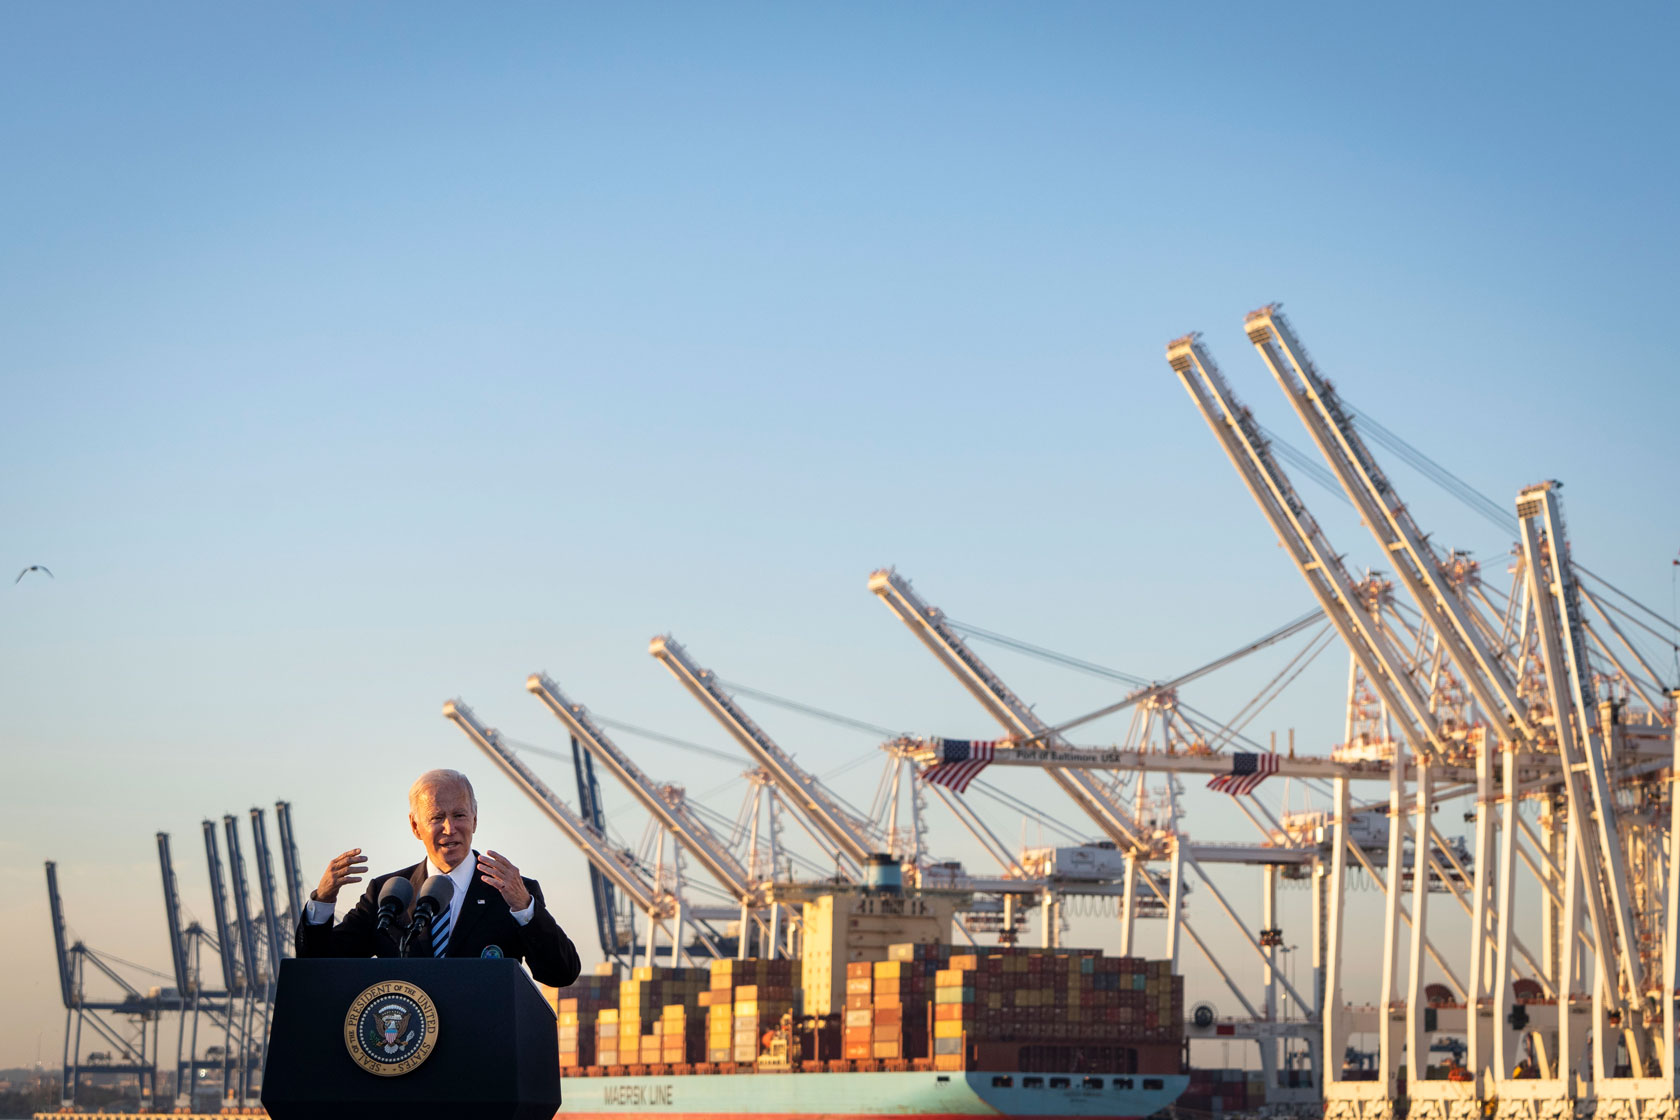 Photo shows President Joe Biden standing at a podium in front of a large port with a docked cargo ship.